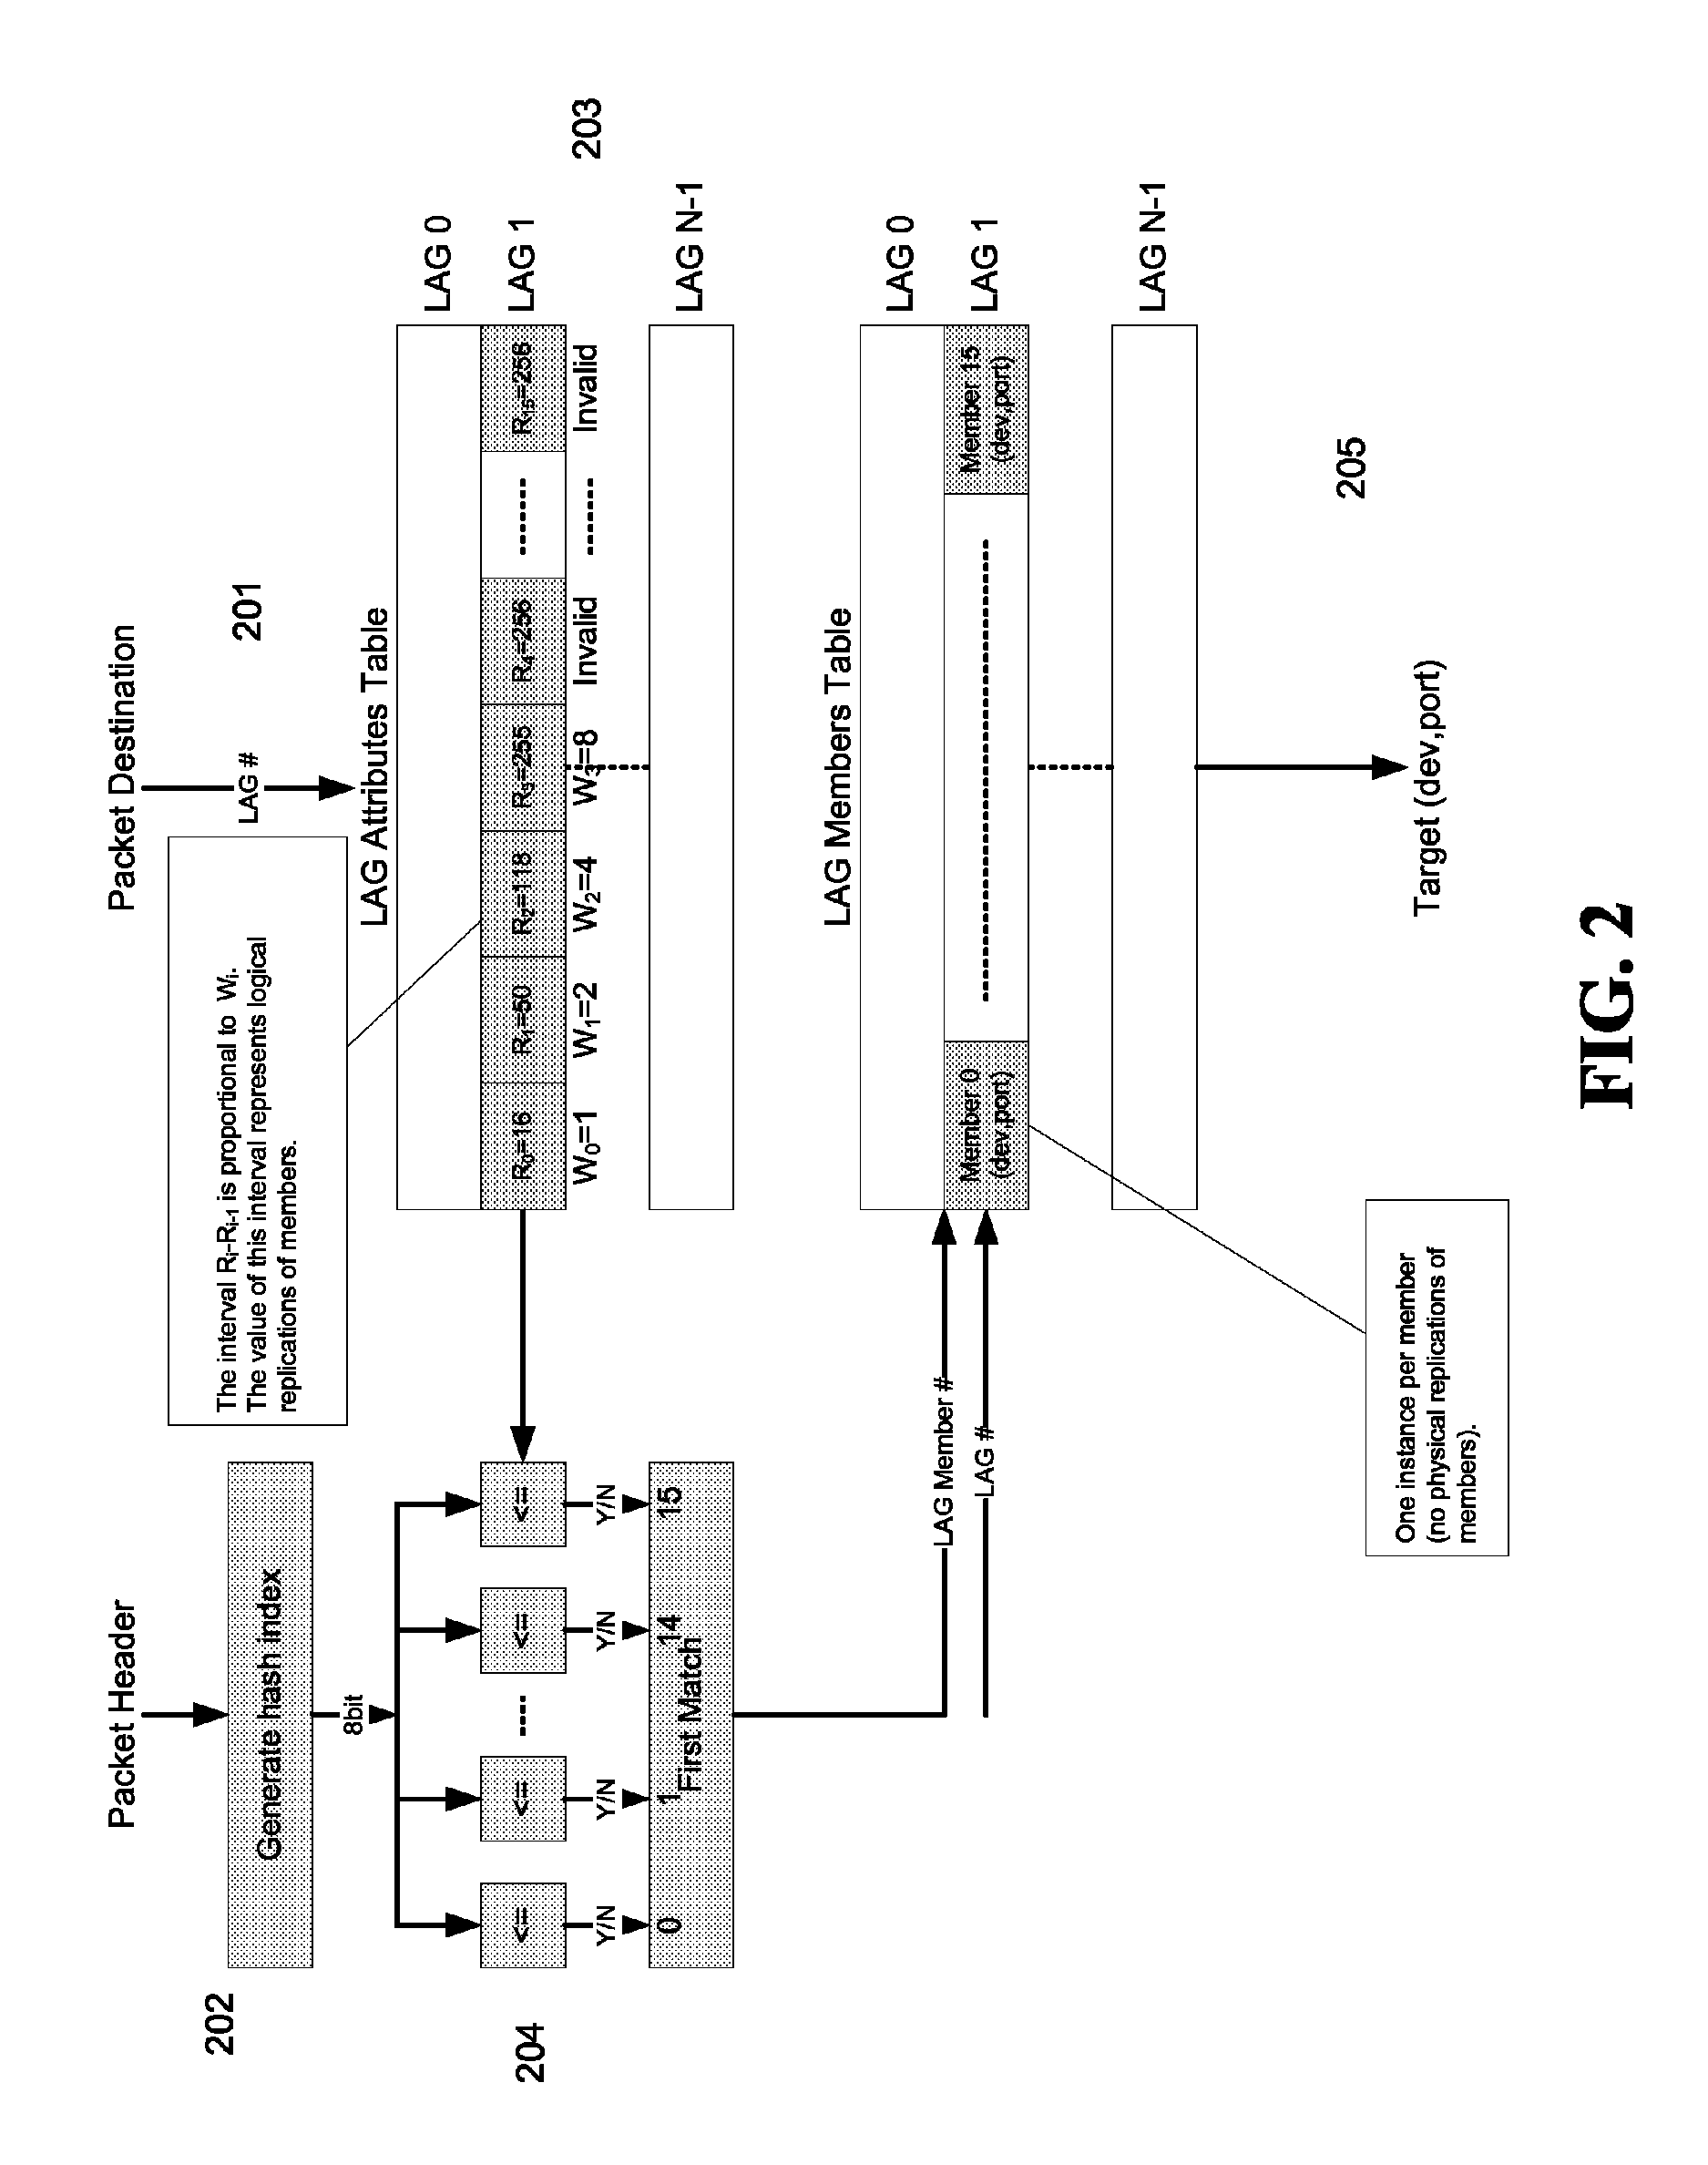 Method for weighted load-balancing among network interfaces